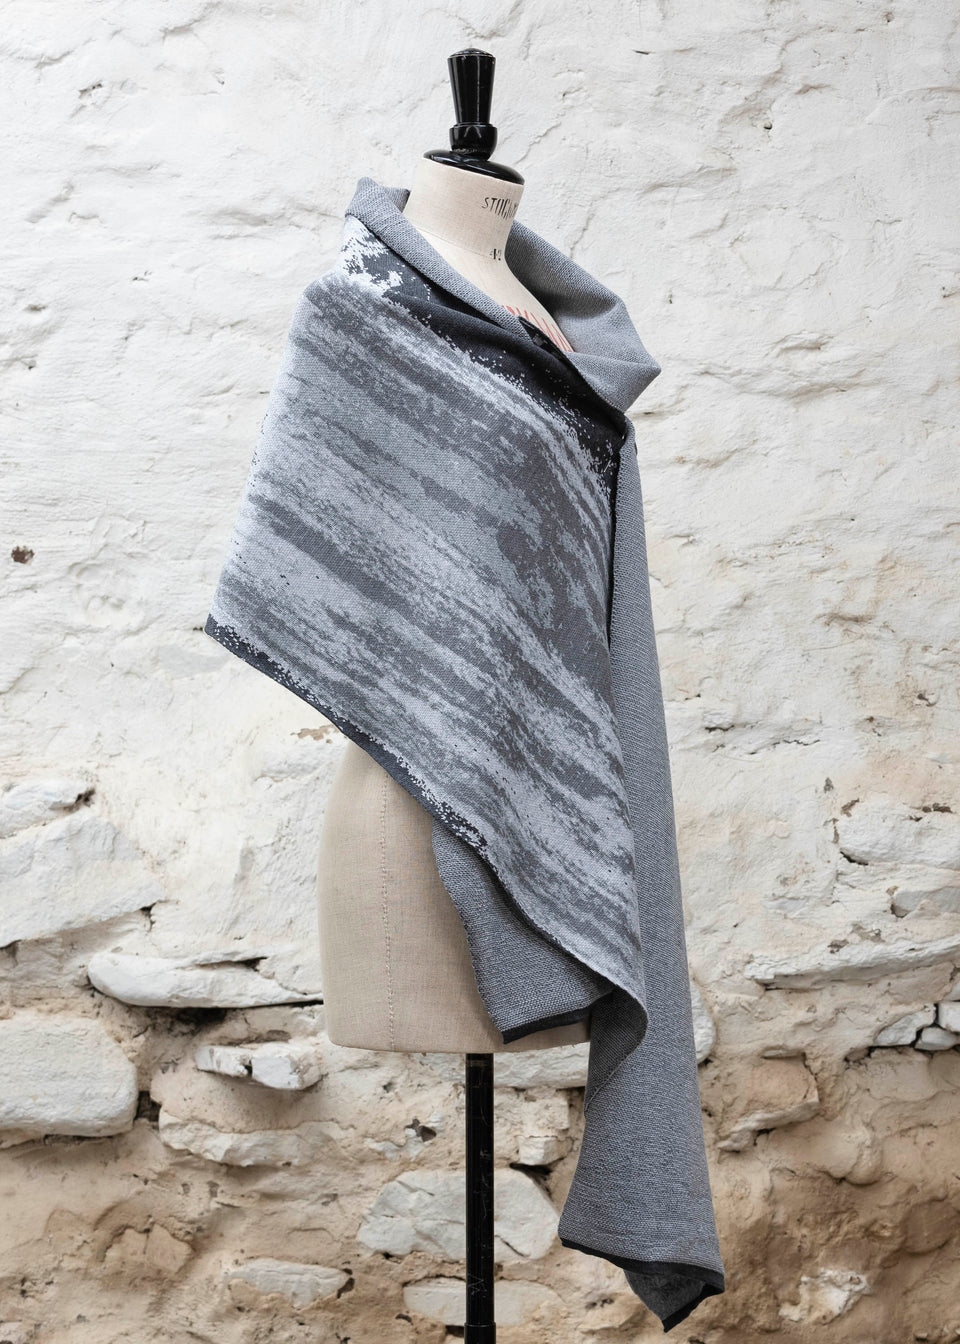 Finely knitted shawl in luxurious merino, made in Scotland. Shown on a vintage mannequin against a whitewashed wall. Abstract design in sea greys with curvilinear motifs. Draped to show shawl pinned from side